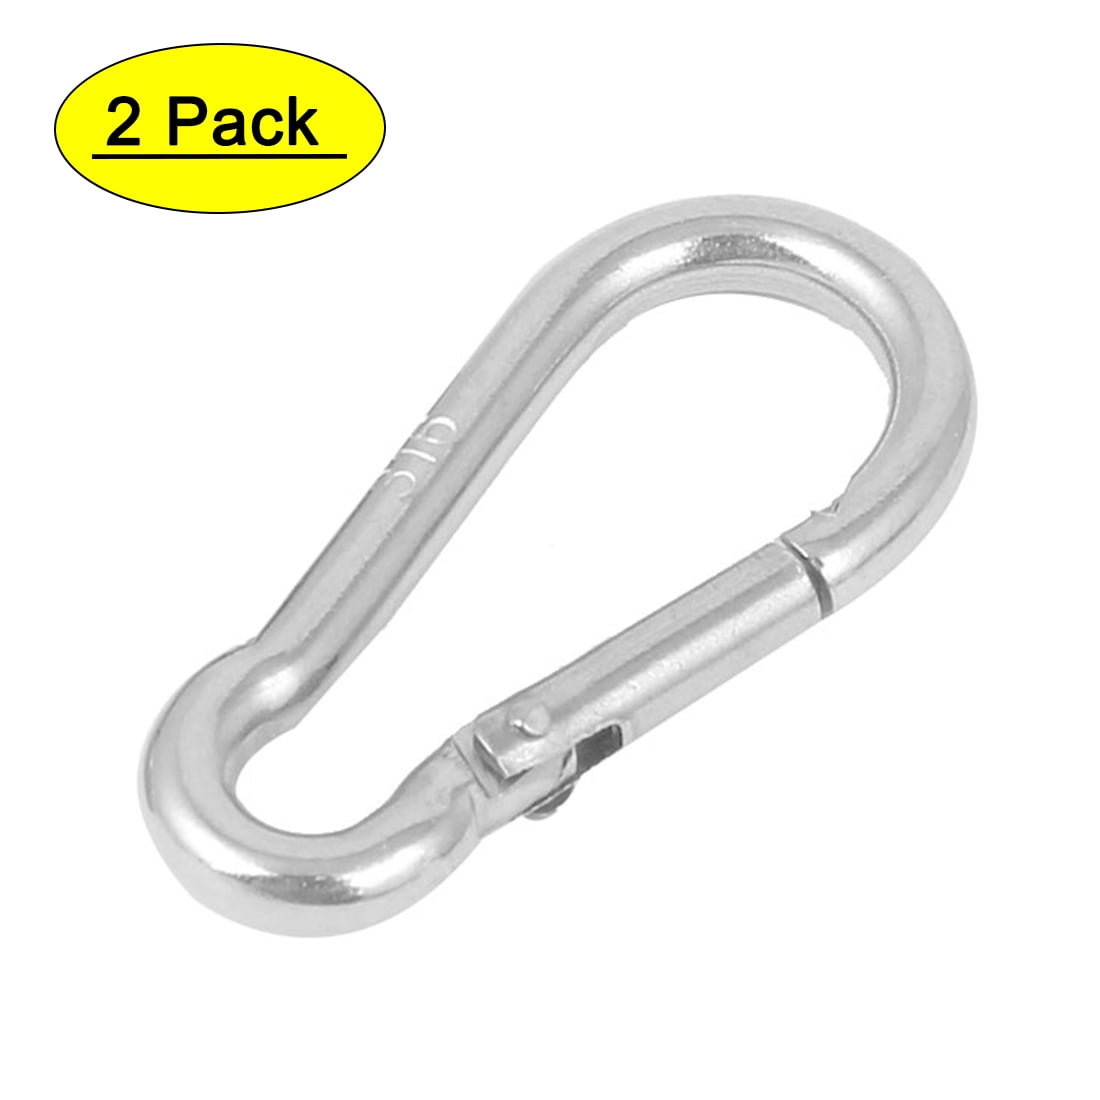 GALVANISED STEEL Carabiner Clip ~ 6mm x 60mm ~ SMALL Snap Hooks Key Ring Clips 